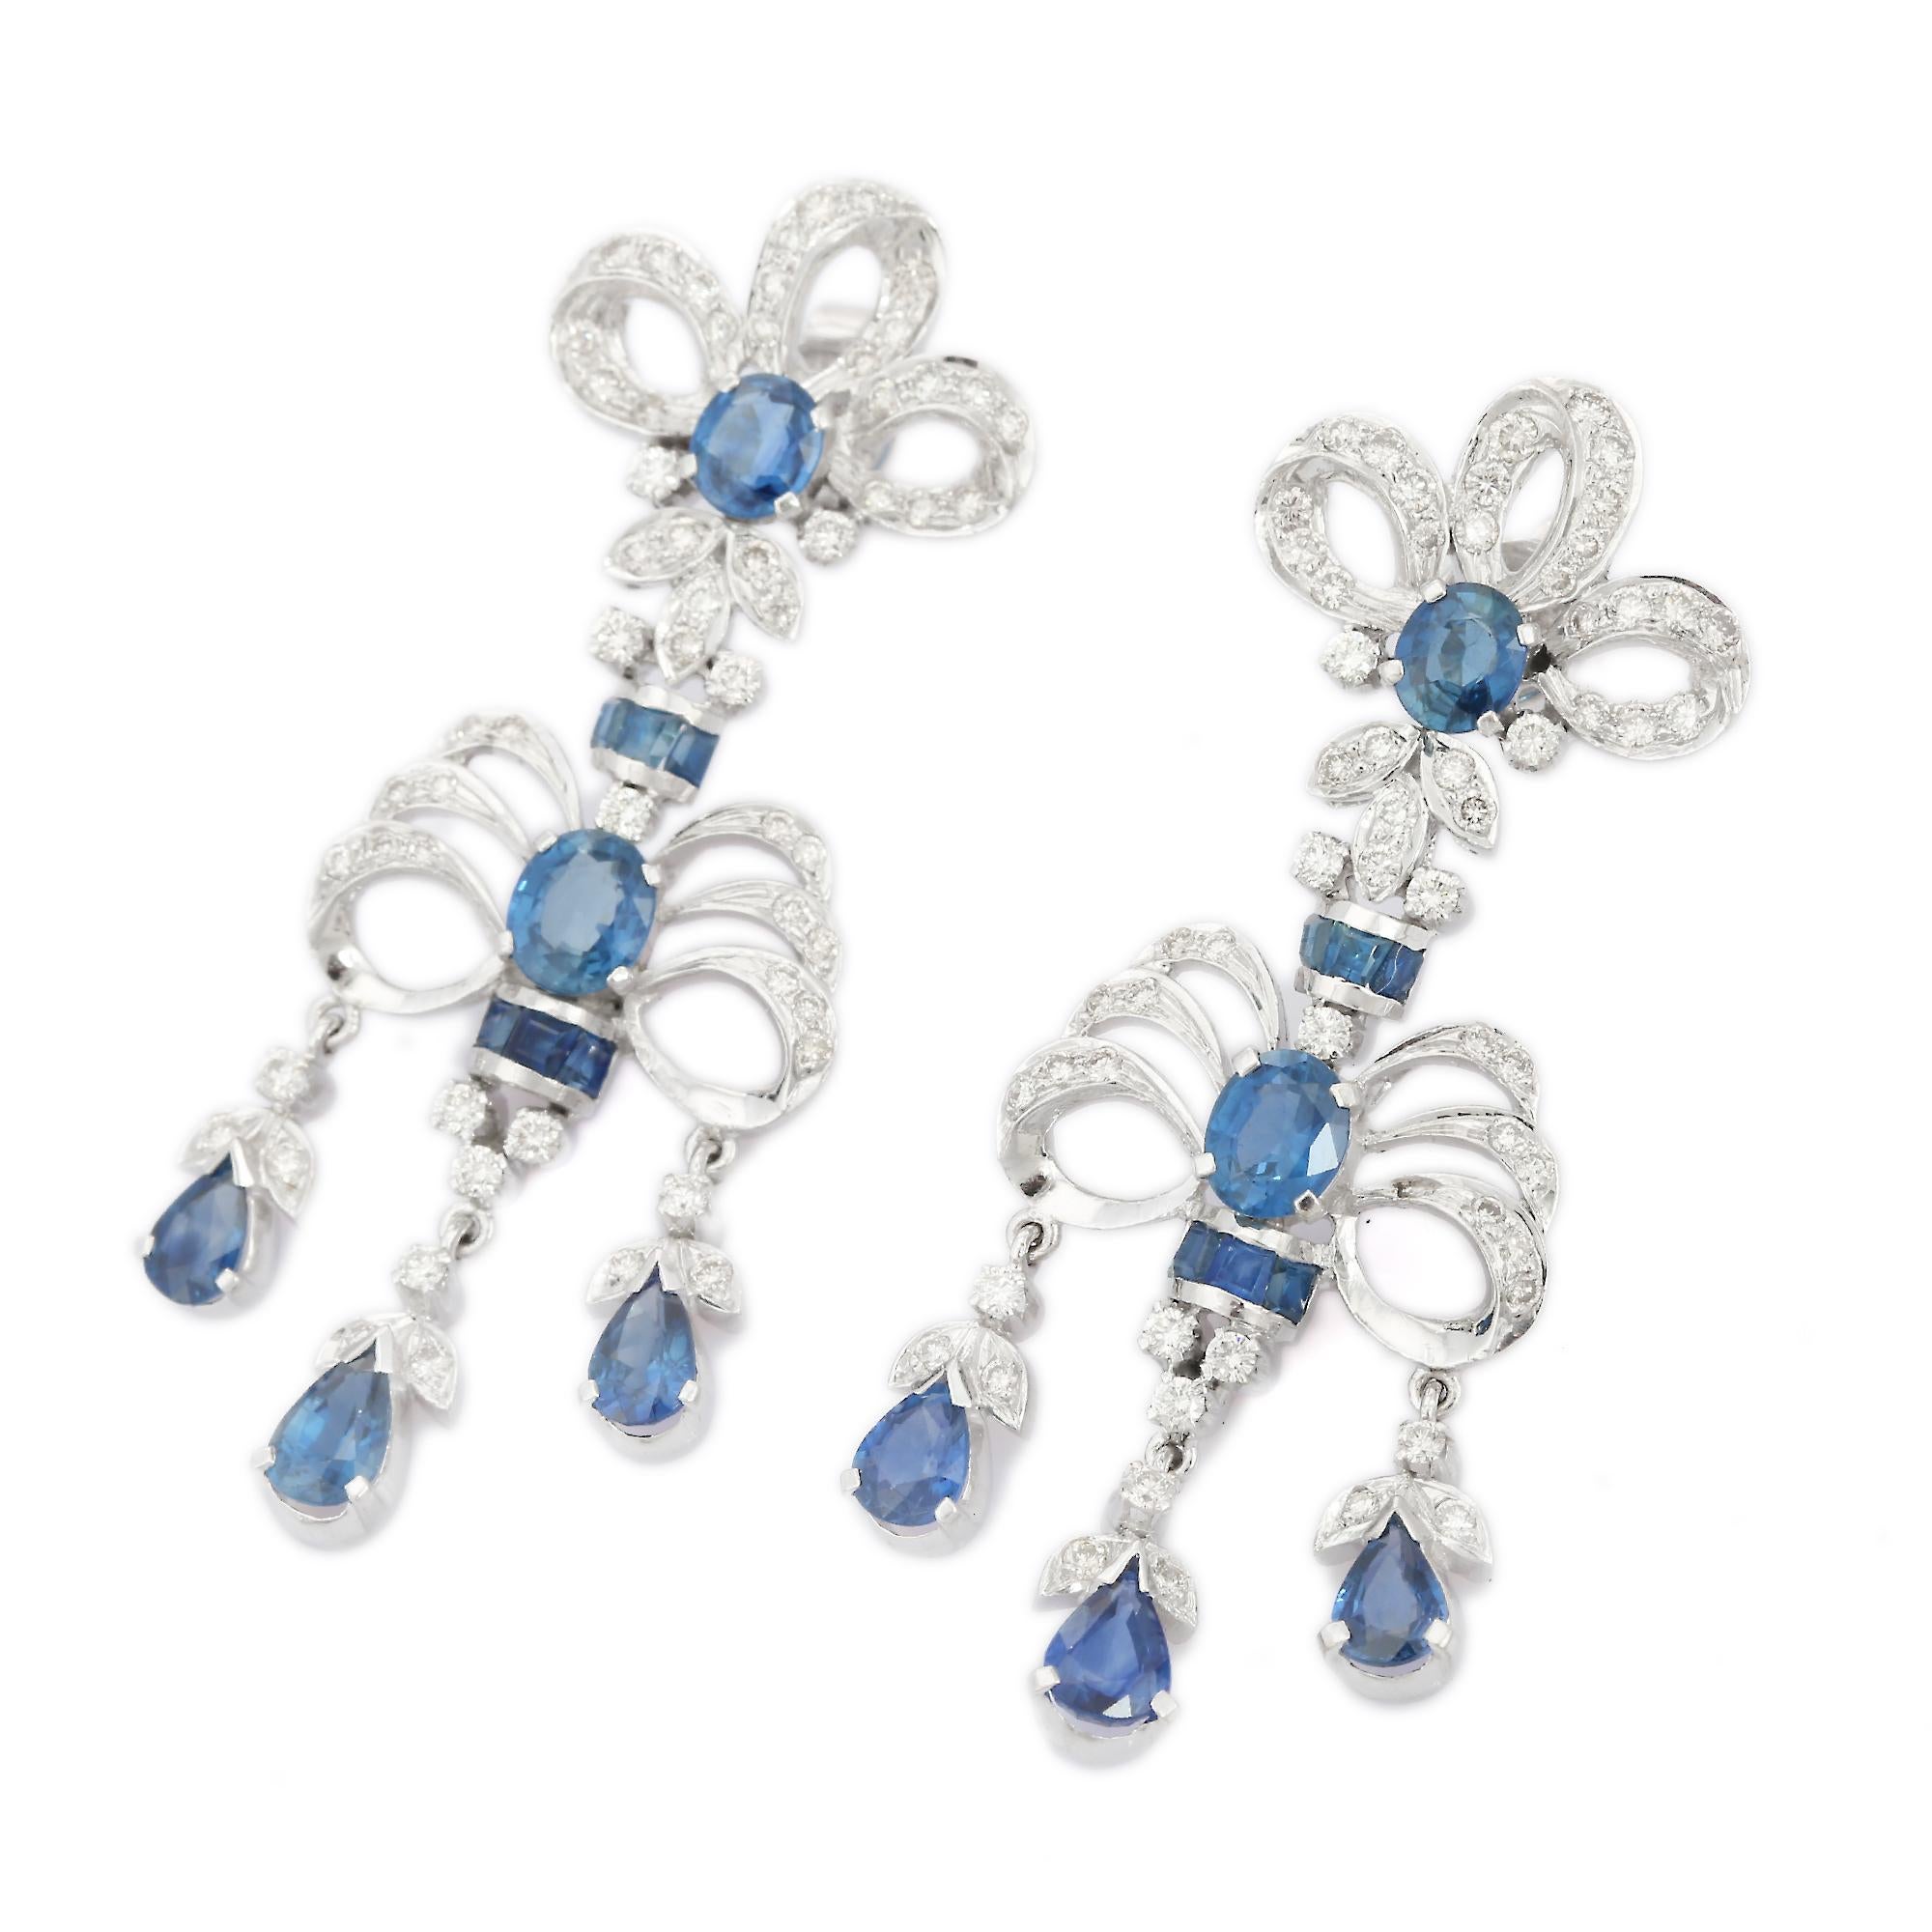 Blue Sapphire Diamond Fine Earrings in 18K Gold to make a statement with your look. You shall need statement dangle earrings to make a statement with your look. These earrings create a sparkling, luxurious look featuring mix cut sapphire.
Sapphire